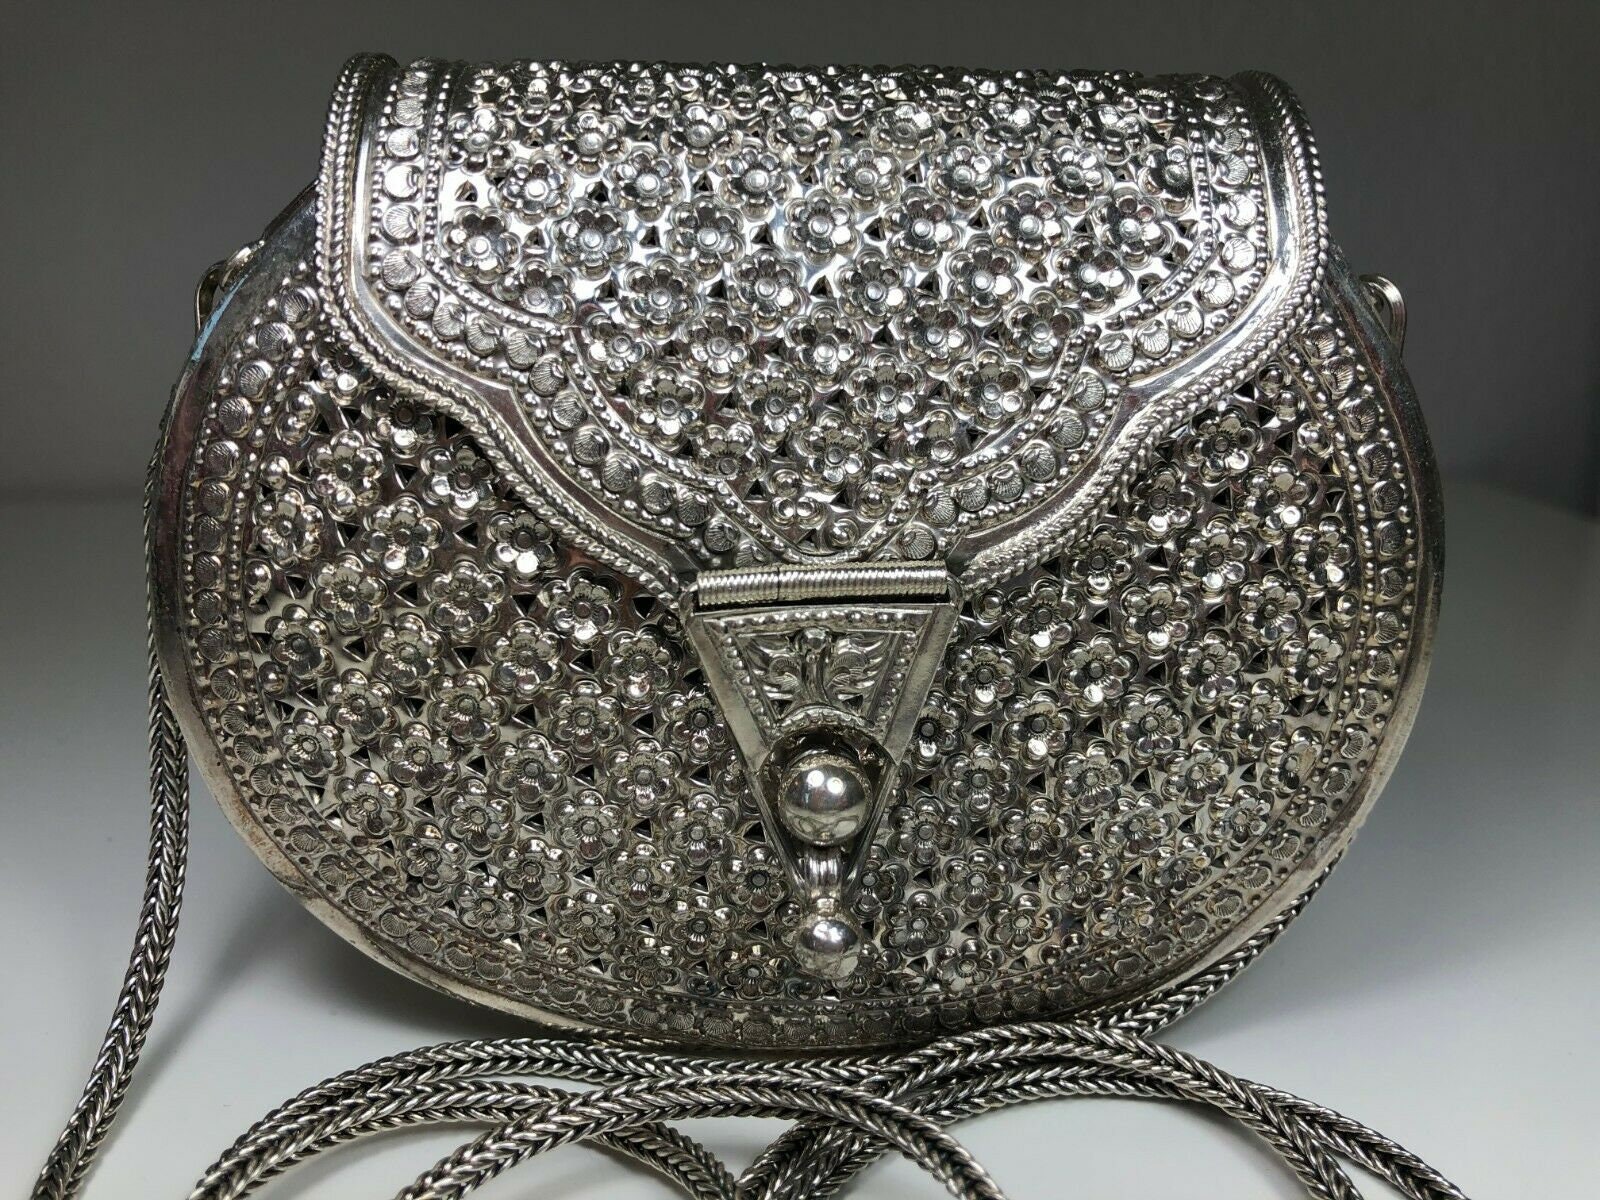 Antique Silver Indian Jaal Purse Bag With Floral and Bird Decoration - Etsy  | Silver clutch purse, Purses, Antique silver